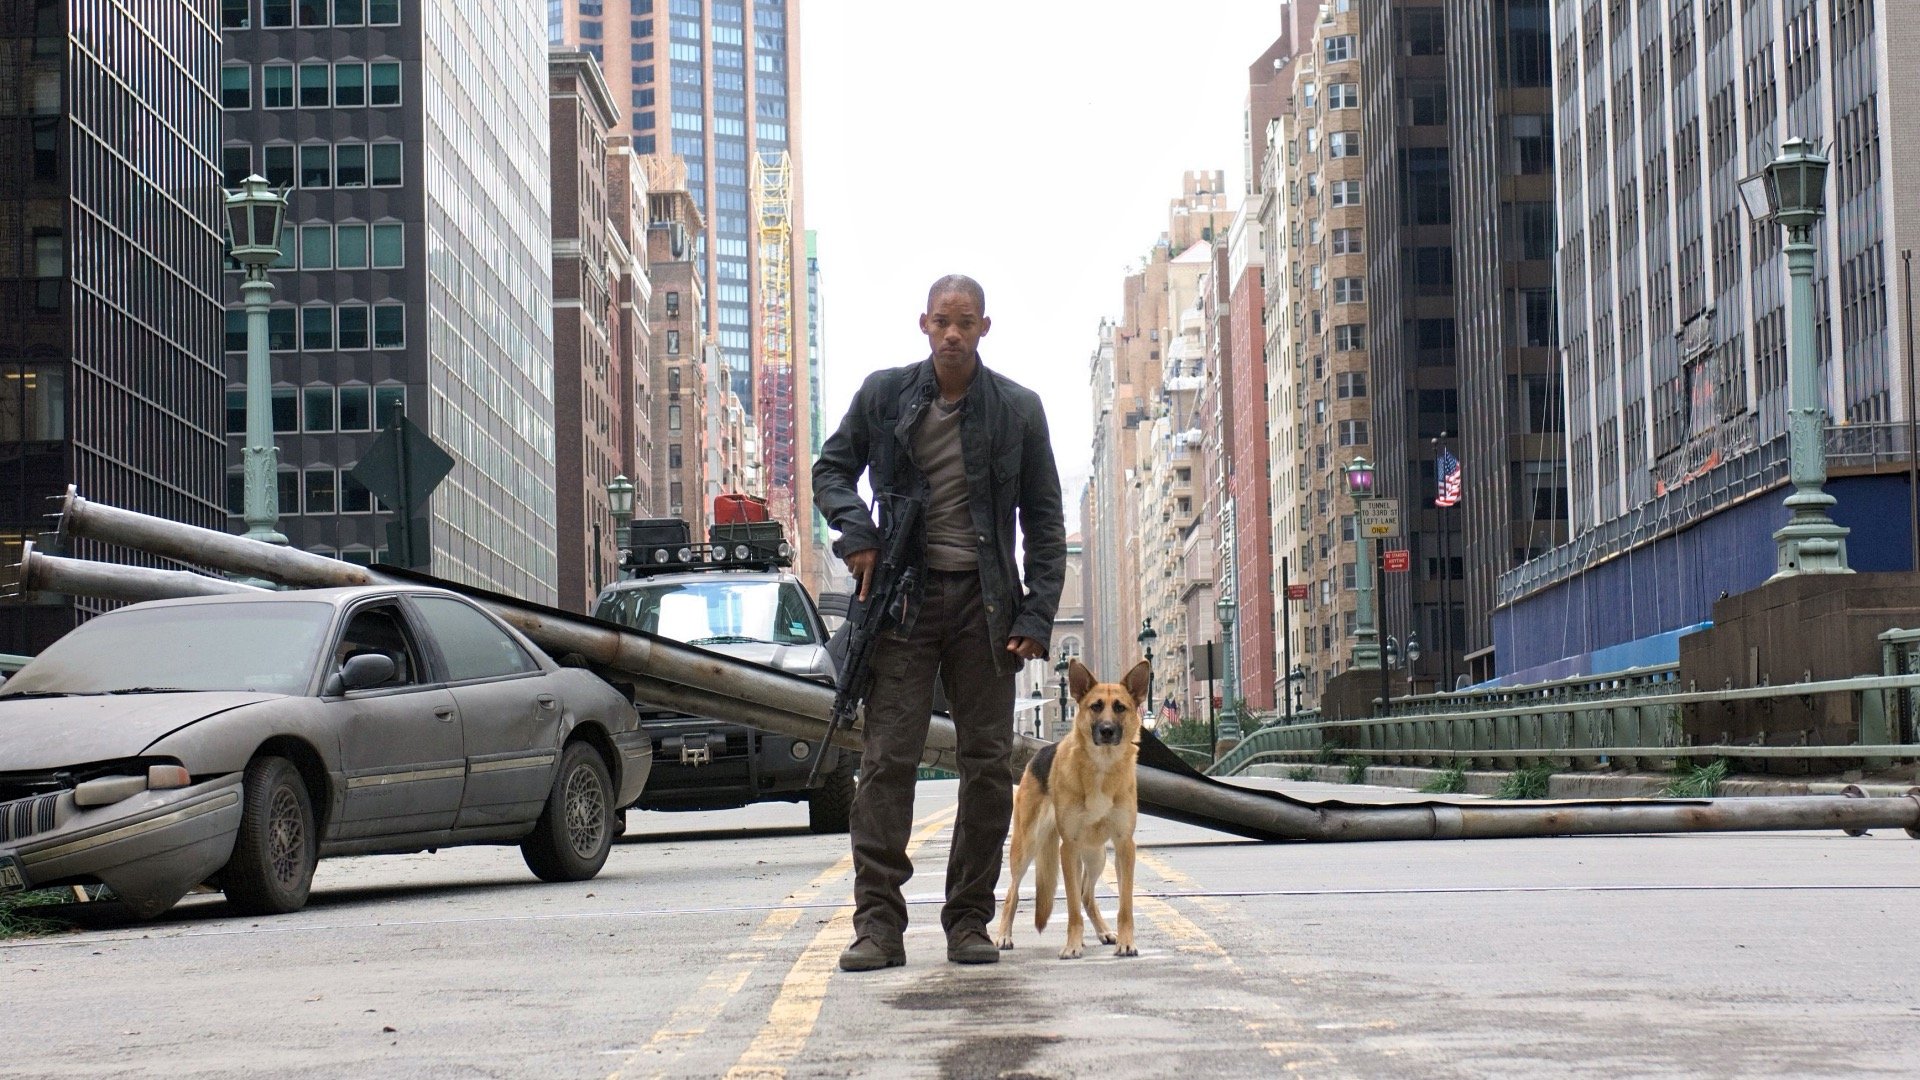 'I Am Legend' : Warner Bros. Is Actively Developing a New Film or Series Will Smith 2007